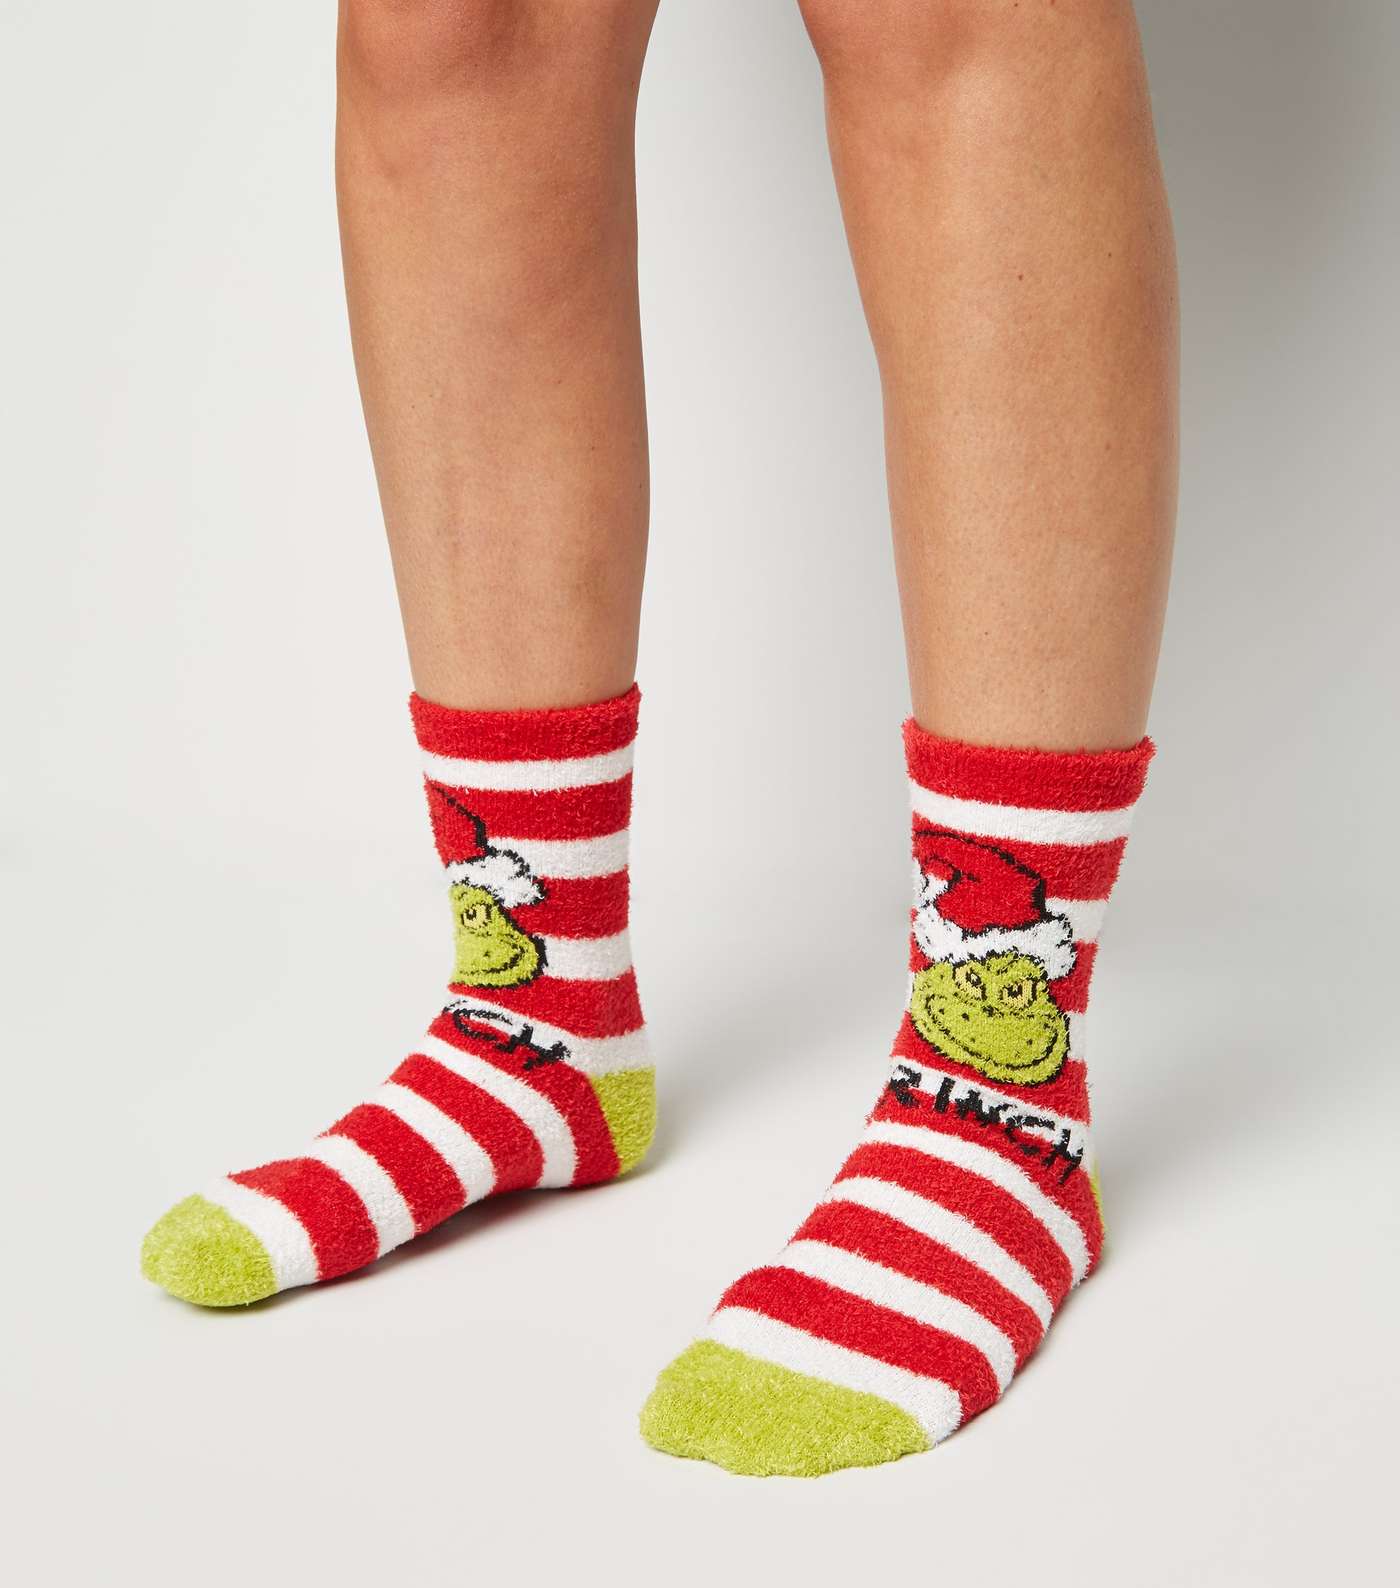 Red Stripe The Grinch Christmas Socks Image 2